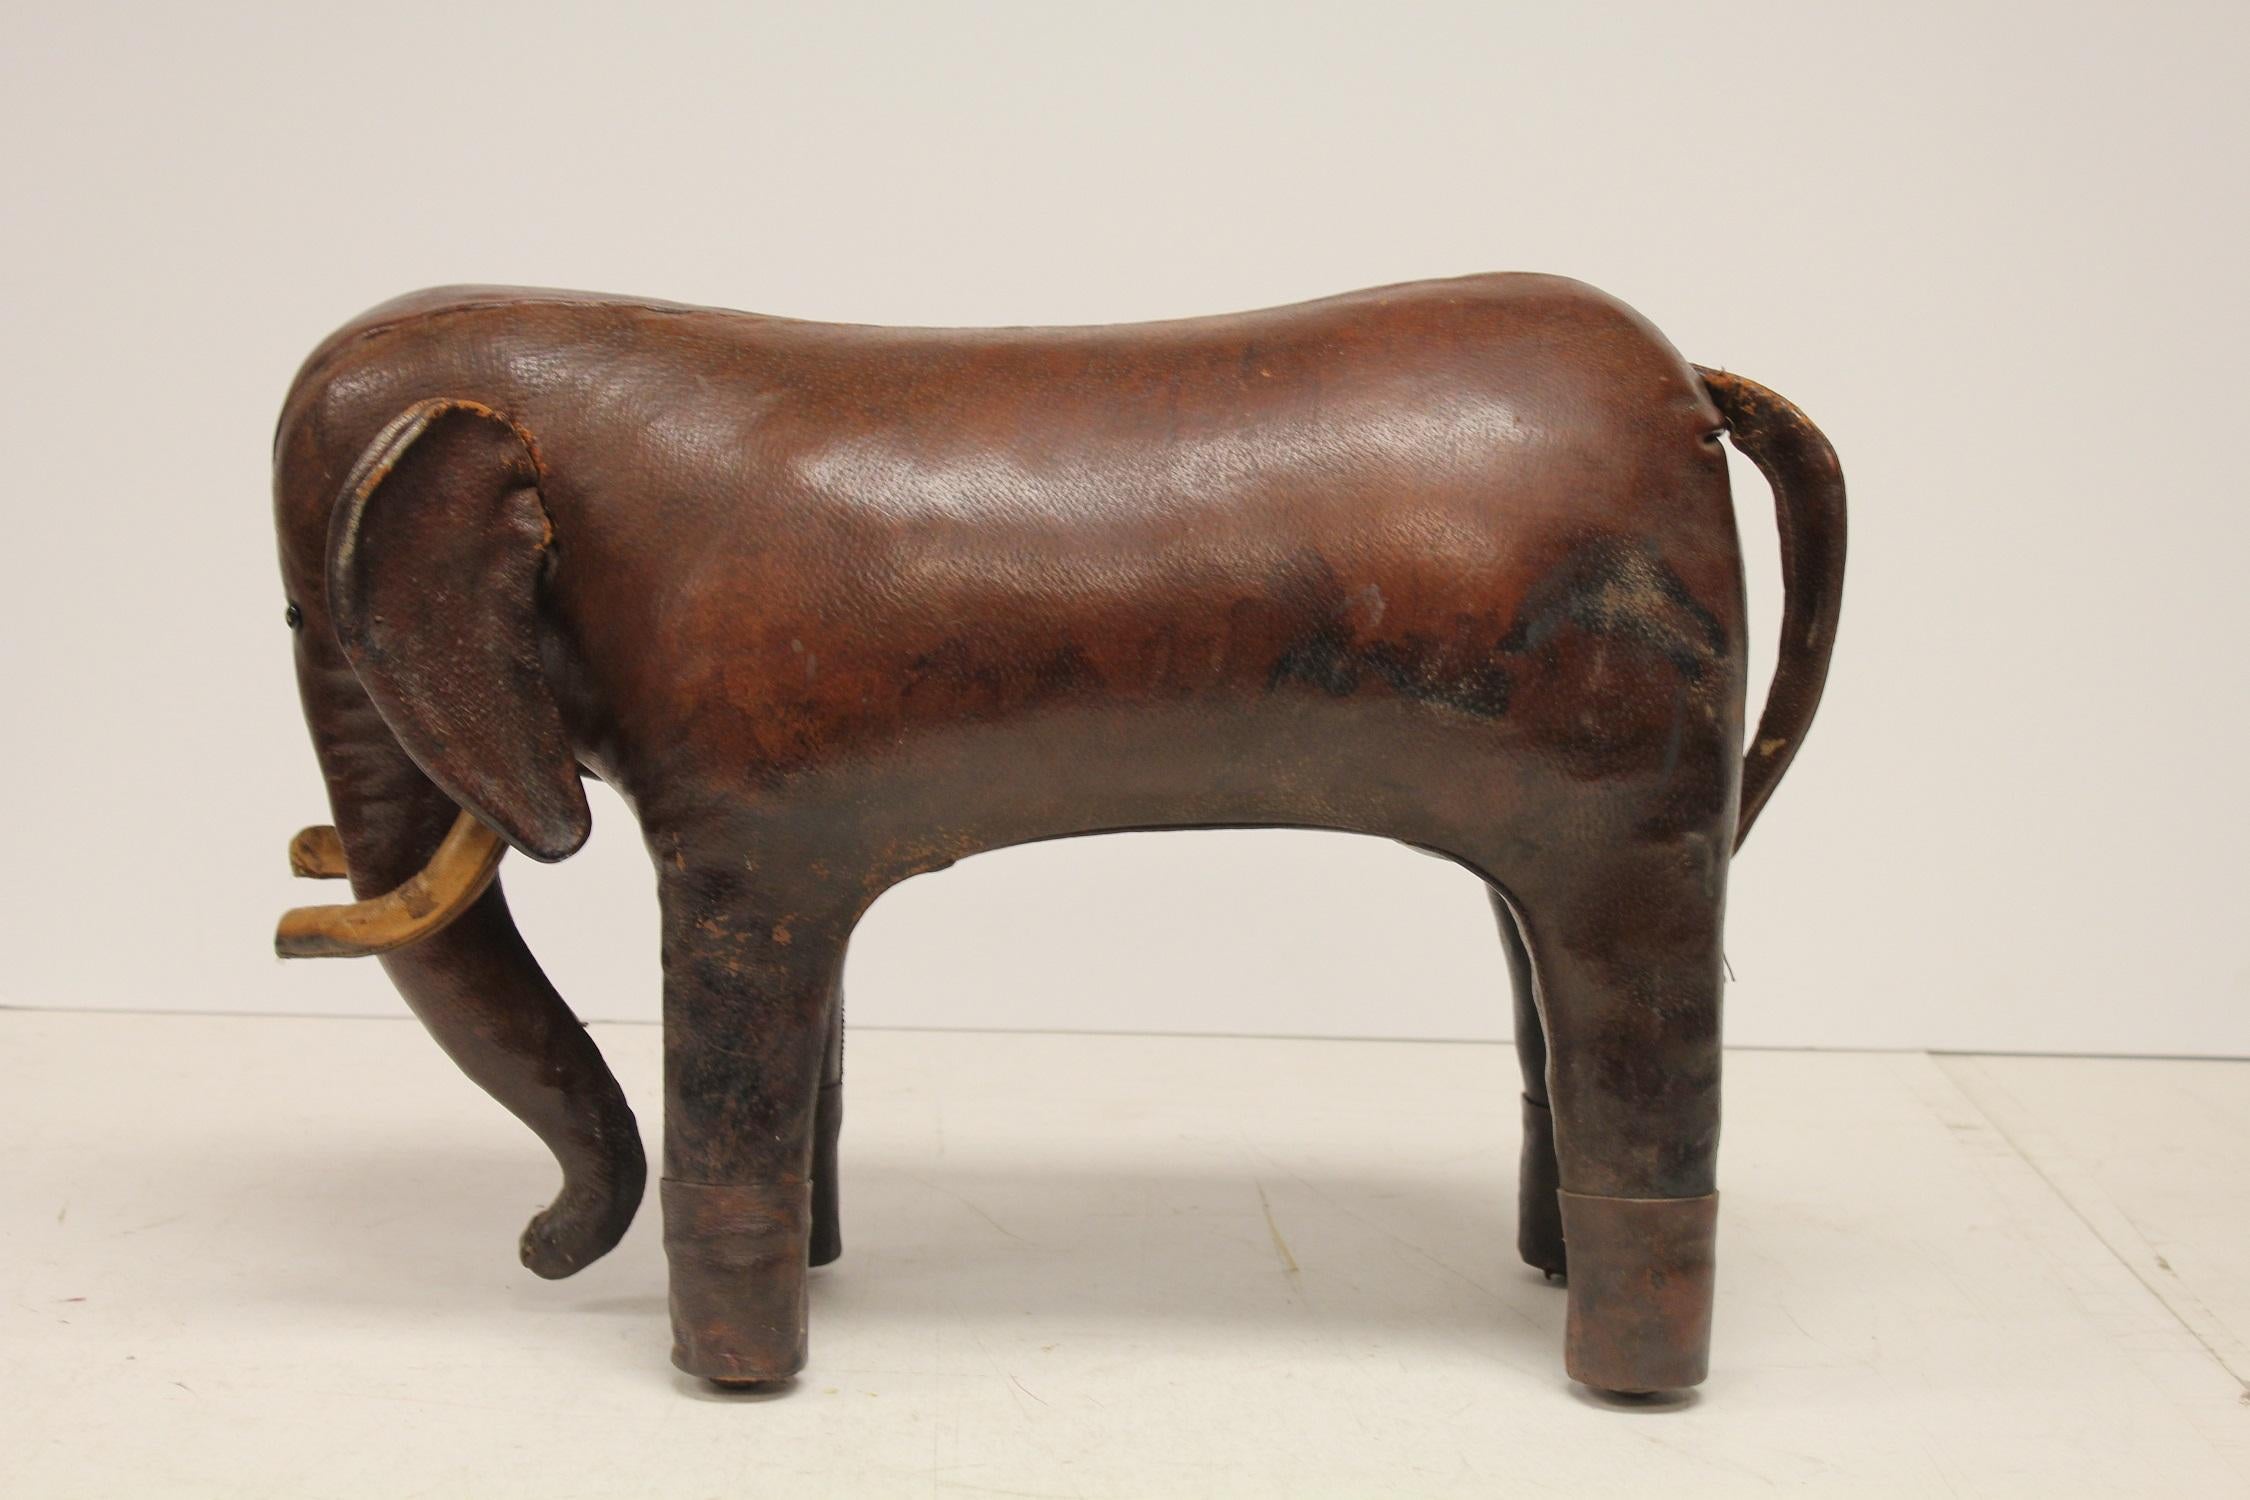 British Vintage Leather Elephant Footstool by Omersa for Abercrombie and Fitch